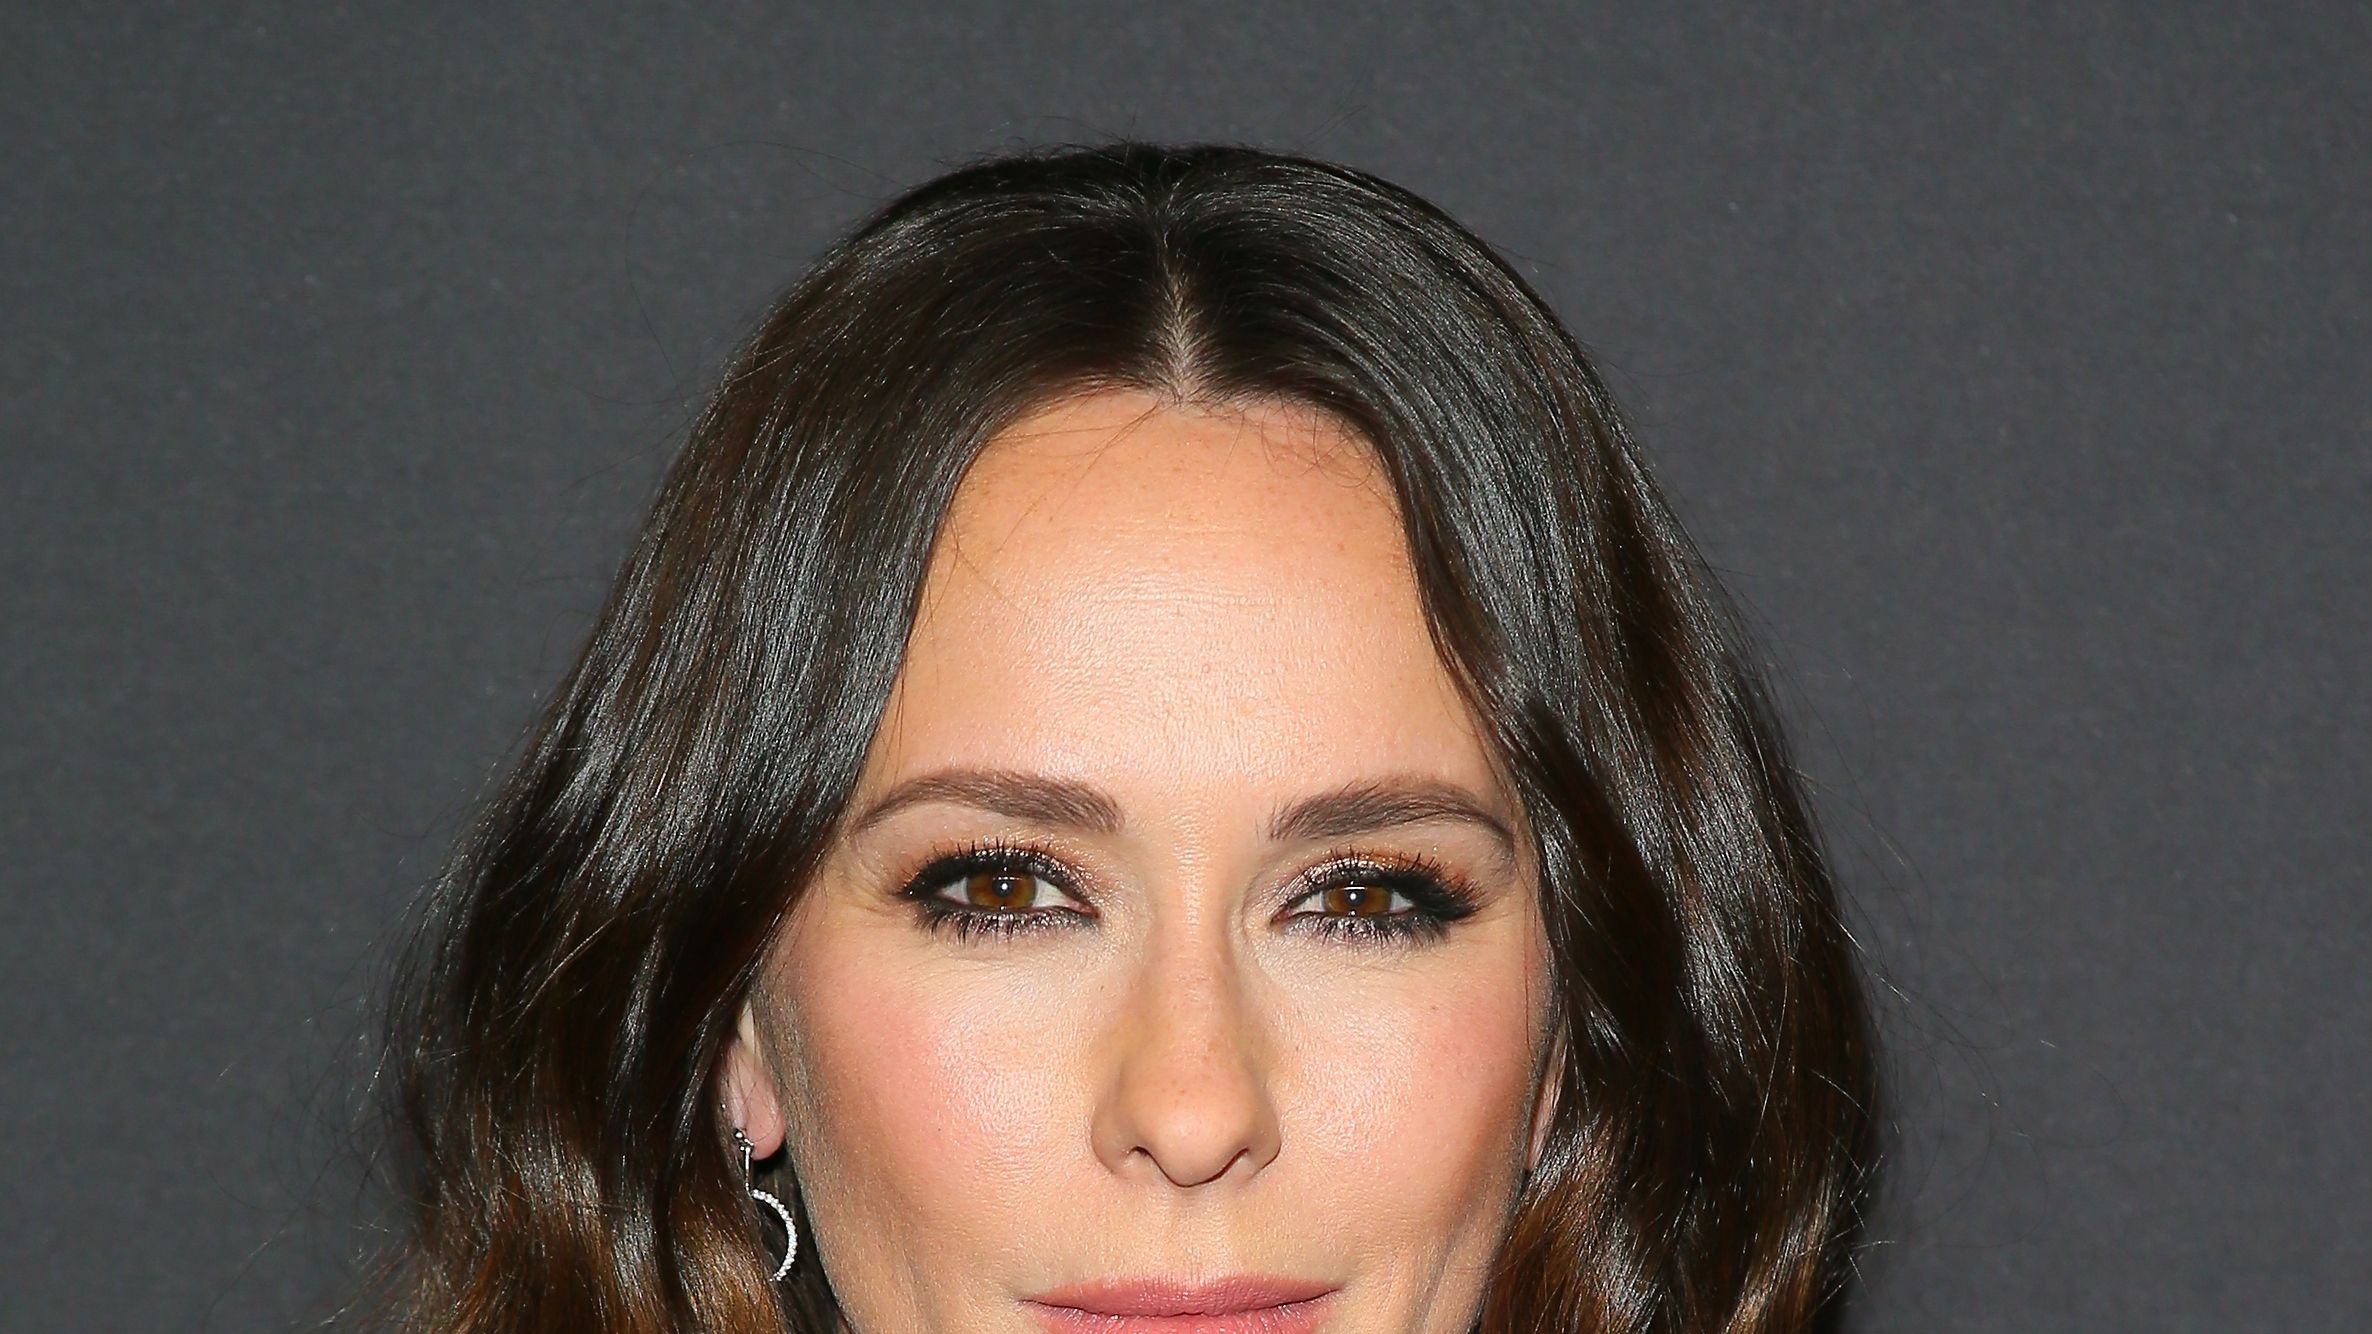 Jennifer Love Hewitt Gets Digital Breast Reduction in The Client